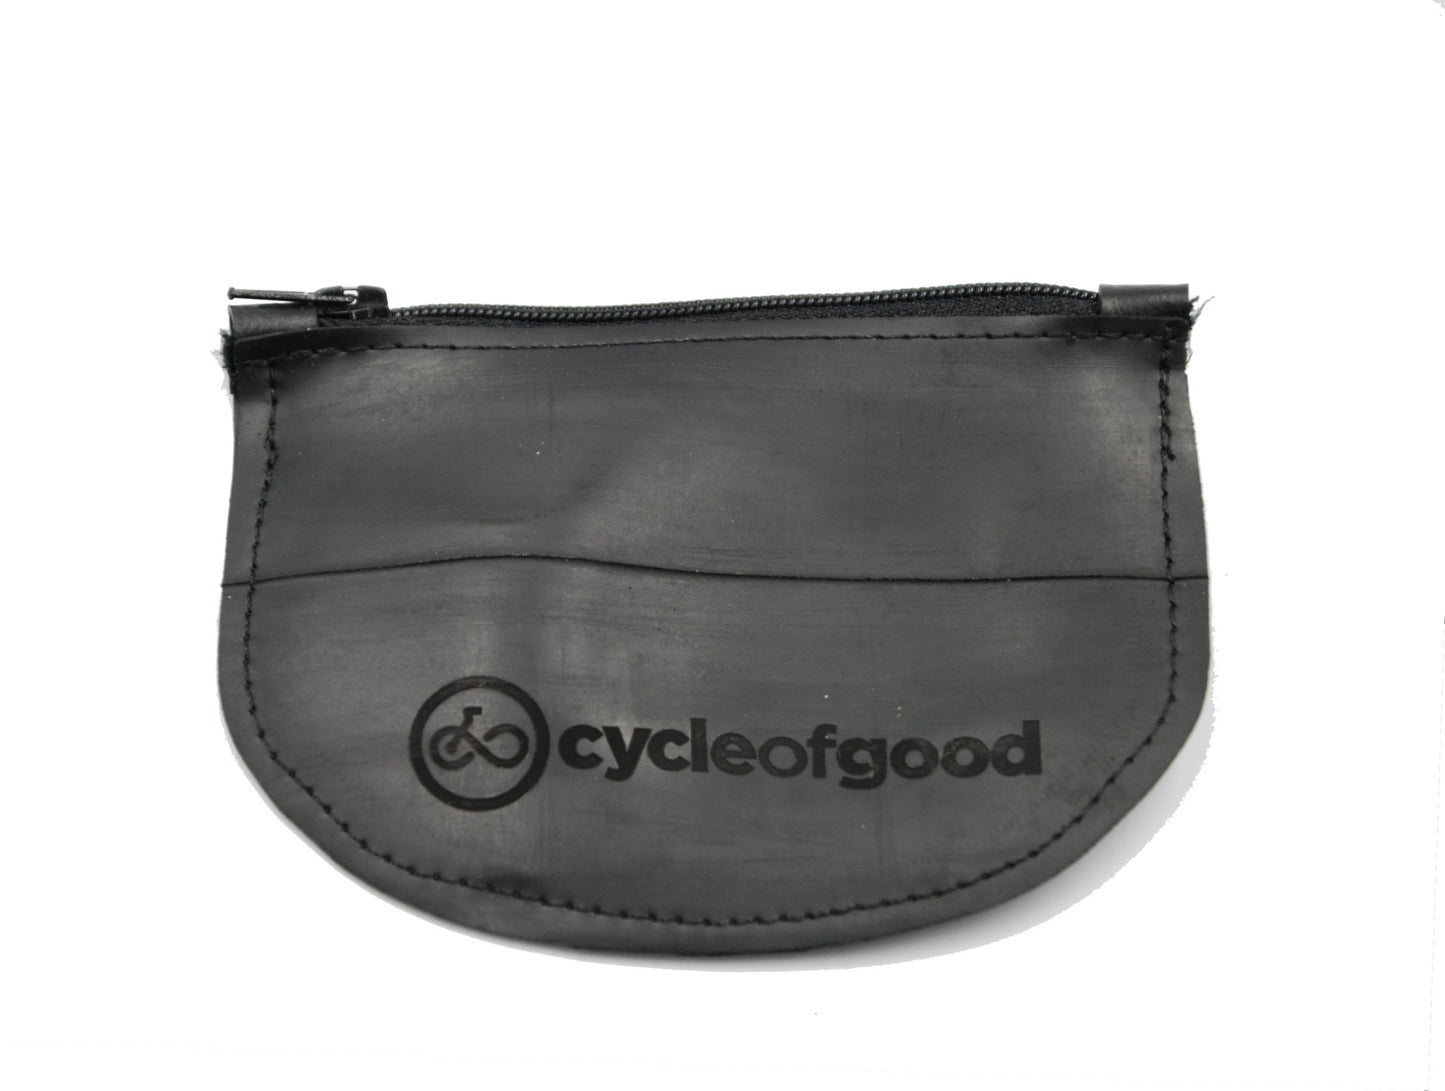 Coin Purse by Cycle of Good